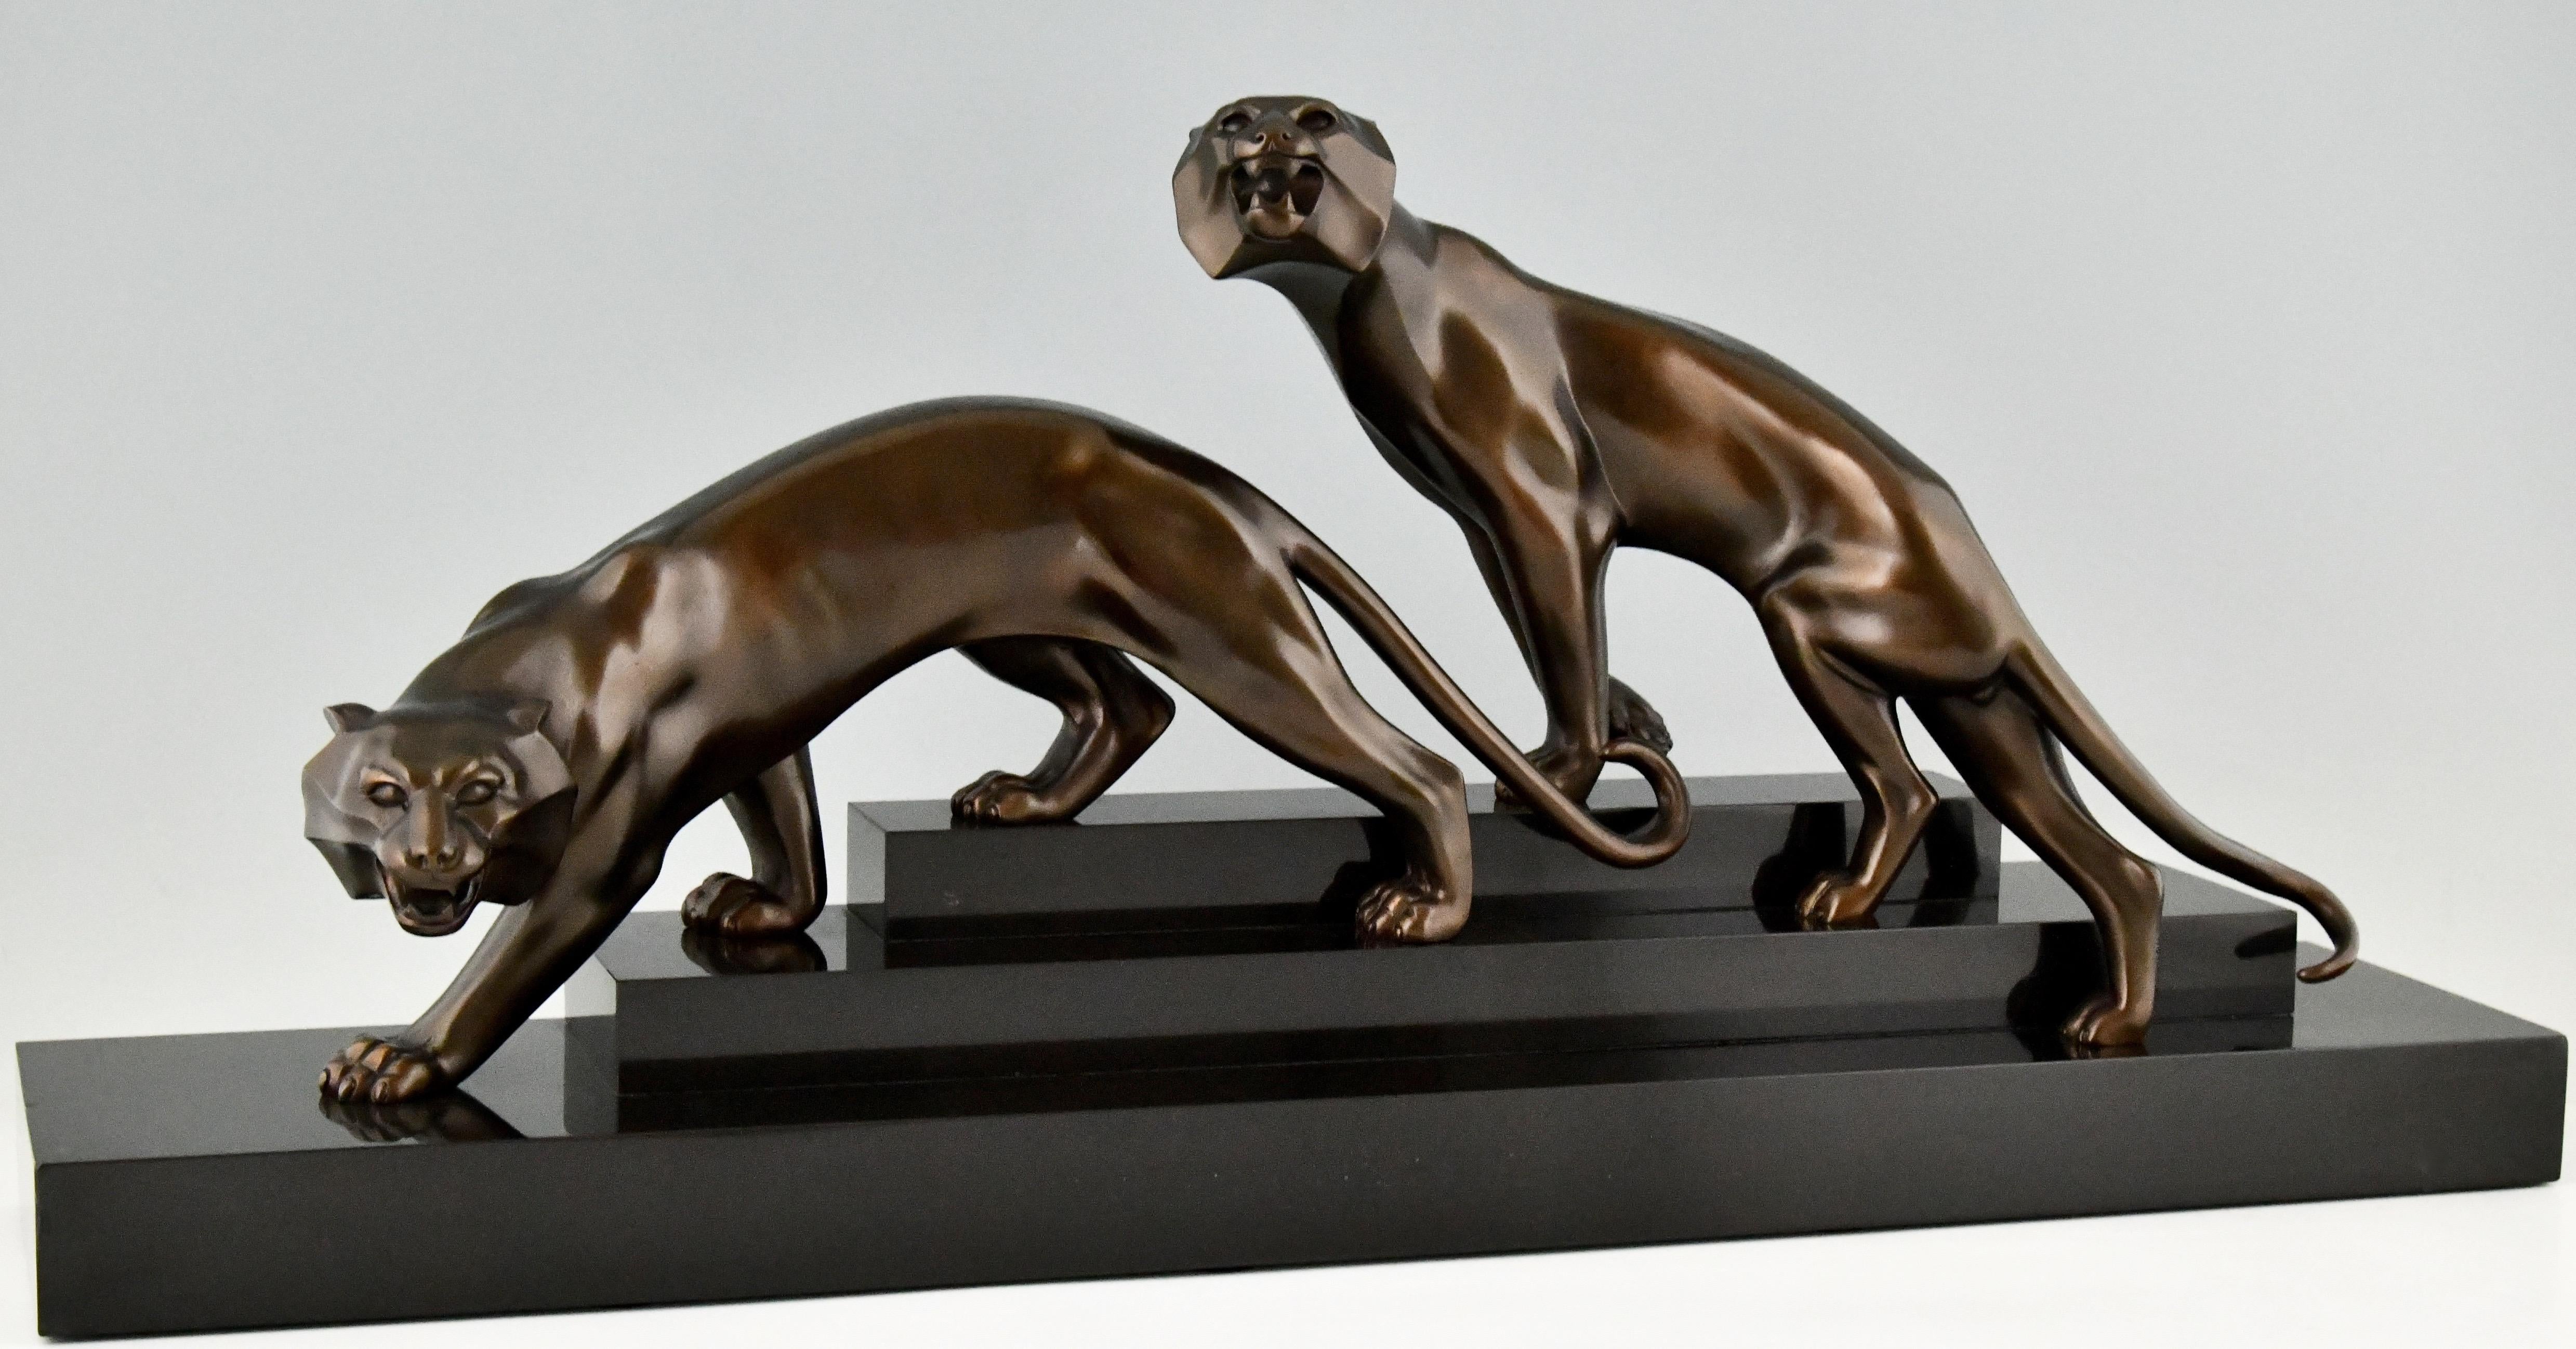 Impressive Art Deco bronze sculpture of two panthers By Georges Lavroff. Born in Russia in 1895, lived and worked in France. Marcel Guillemard foundry seal. Patinated bronze on stepped Belgian Black marble base.
This panther group is 3 times